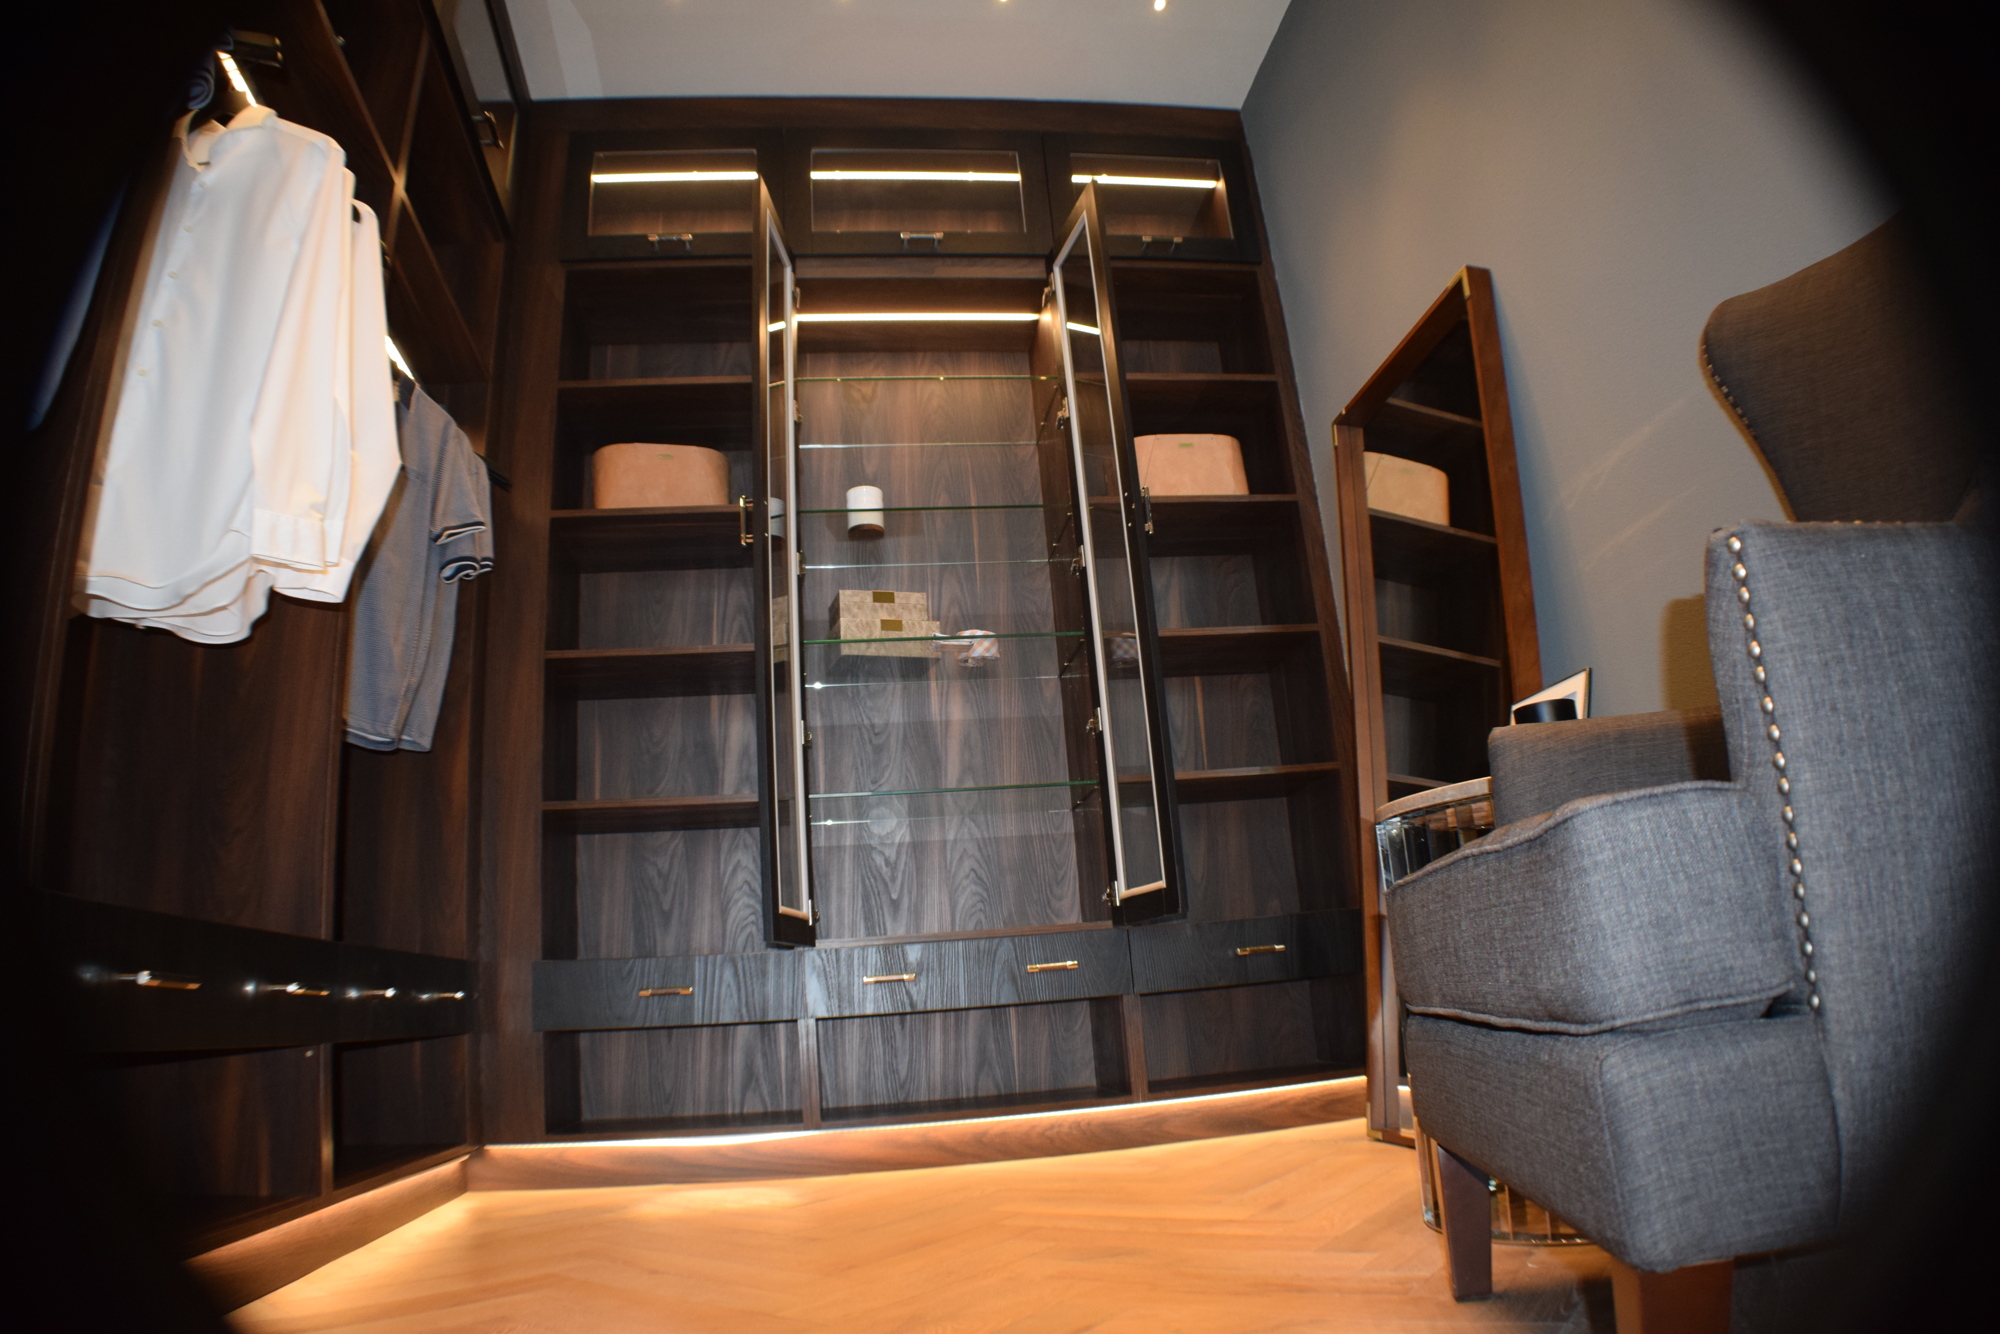 John Cannon designed this Korina model men’s closet to create the ambiance of a luxurious locker room.